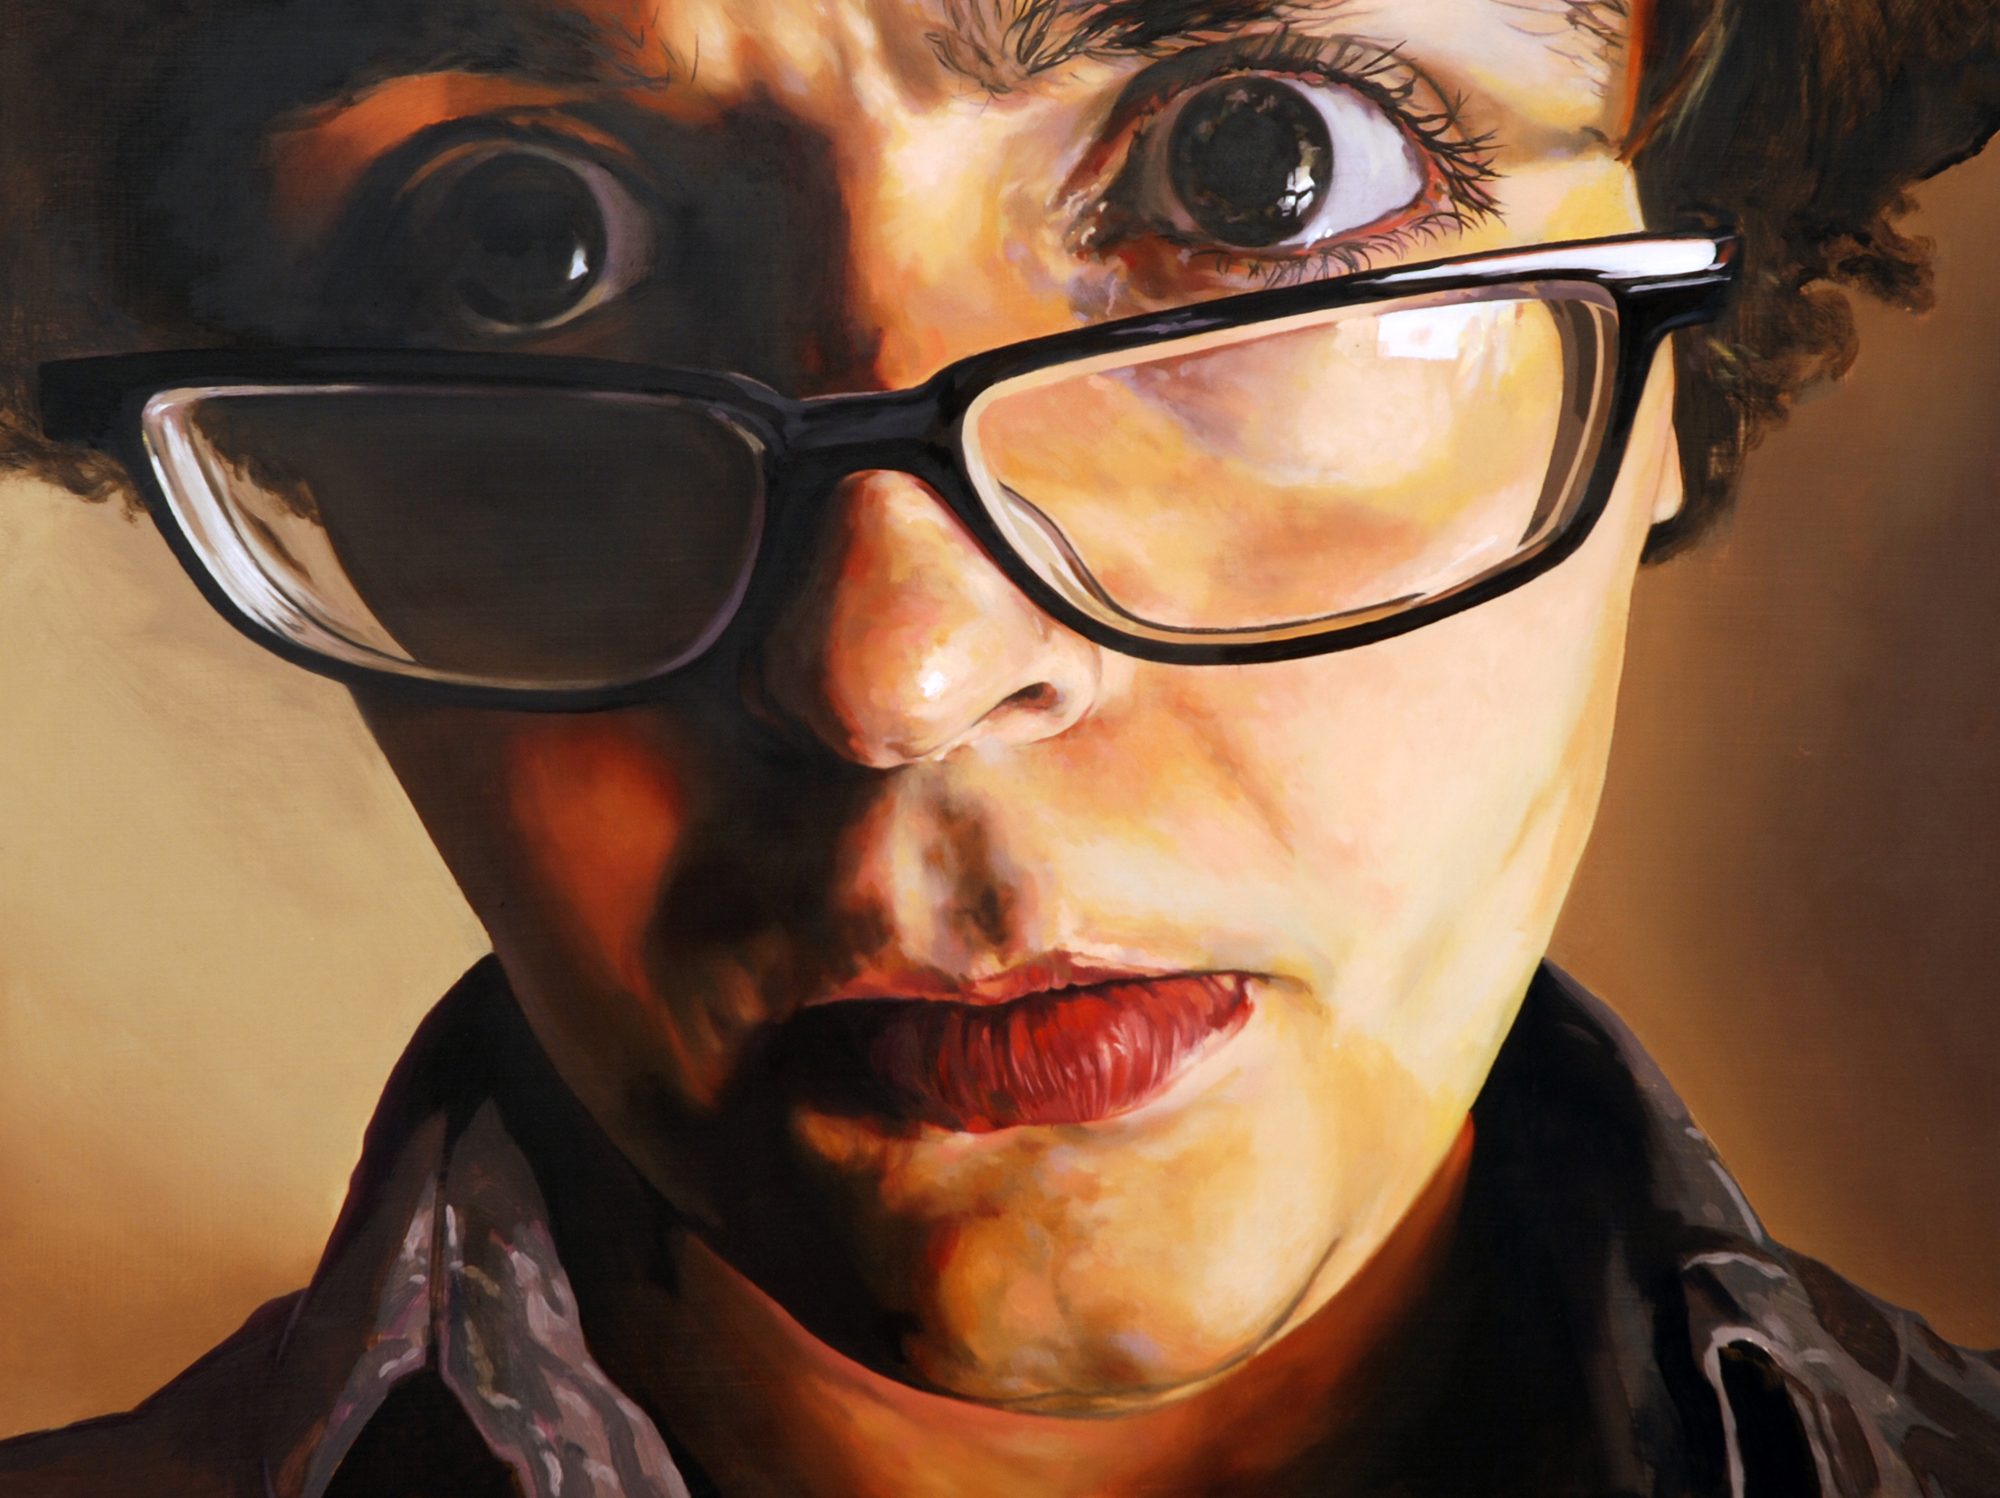 Close-up portrait painting of a person wearing glasses.